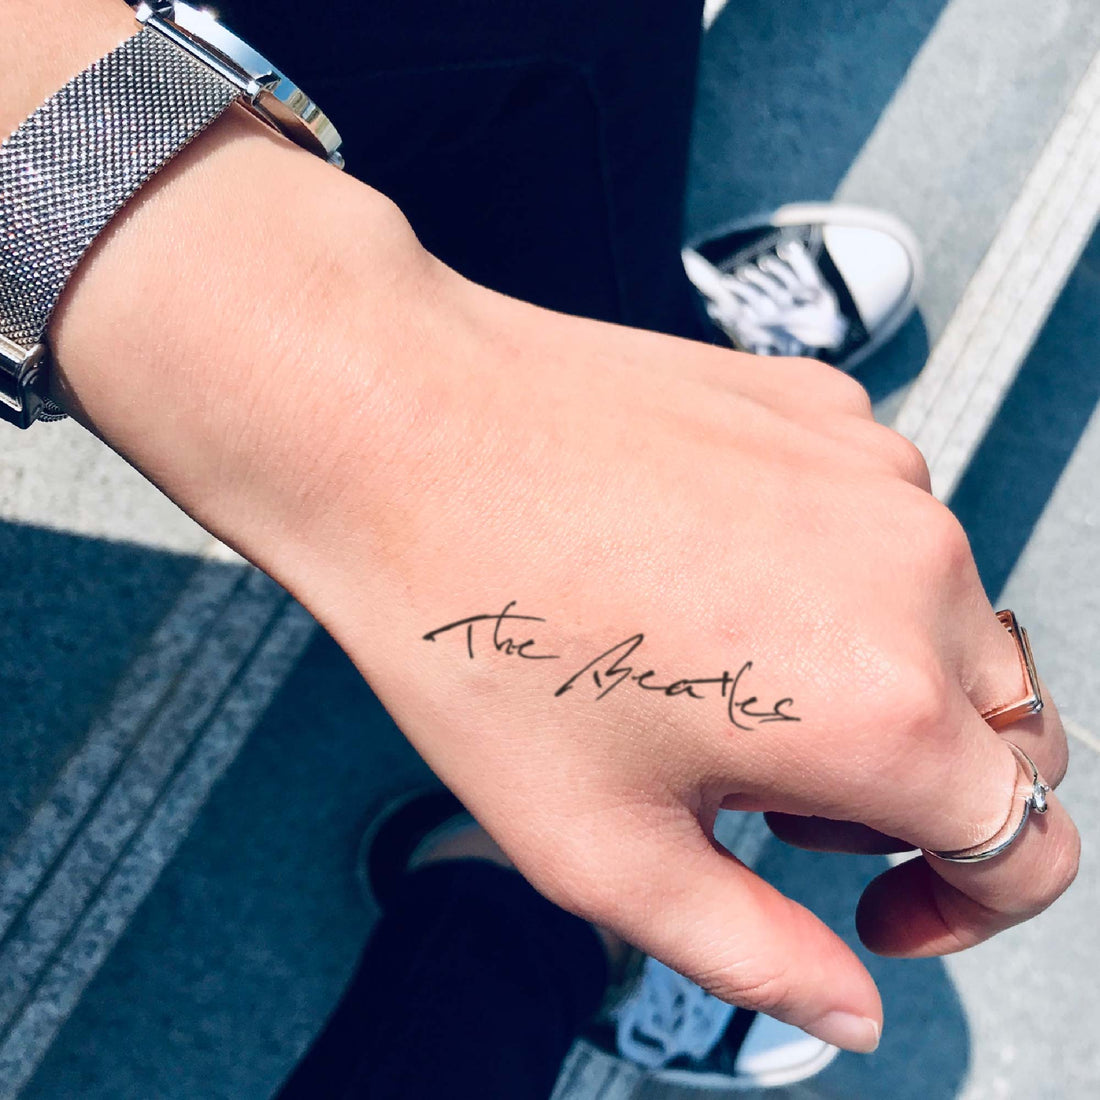 The Beatles custom temporary tattoo sticker design idea inspiration meanings removal arm wrist hand words font name signature calligraphy lyrics tour concert outfits merch accessory gift souvenir costumes wear dress up code